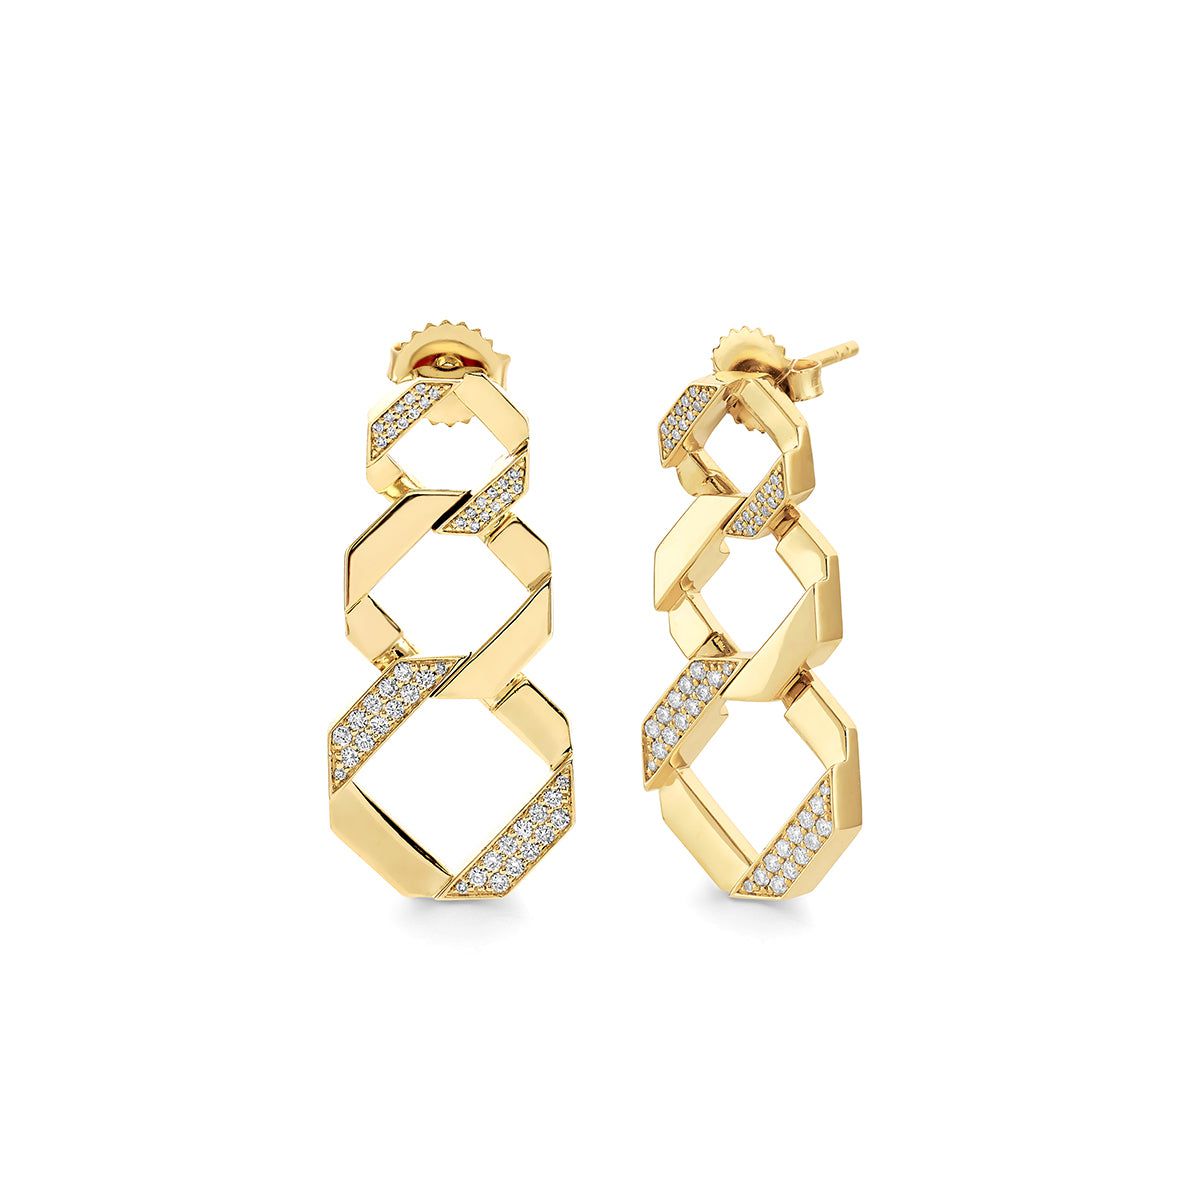 MICHAEL M Fashion Rings 14K Yellow Gold Octave Chain Link Drop Earrings